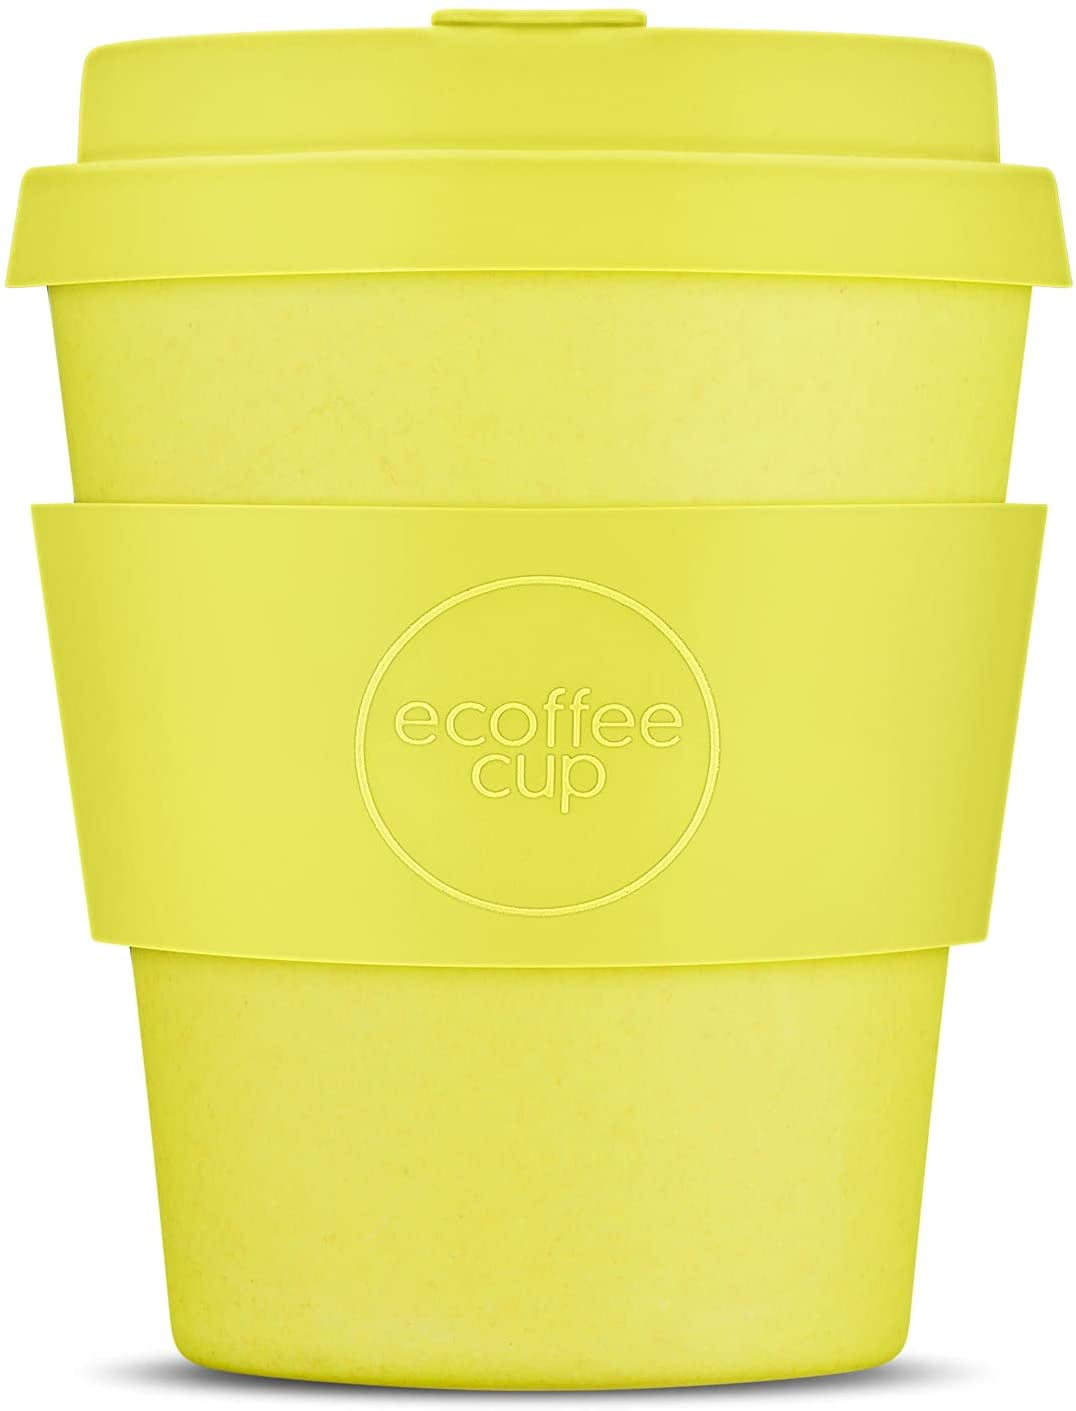 bioGo Reusable Coffee Cups with Lids 16 oz | to Go Coffee Cup | Dishwasher Safe Travel Coffee Mug | Plastic Travel Cup (Butterscotch Yellow, 16oz)